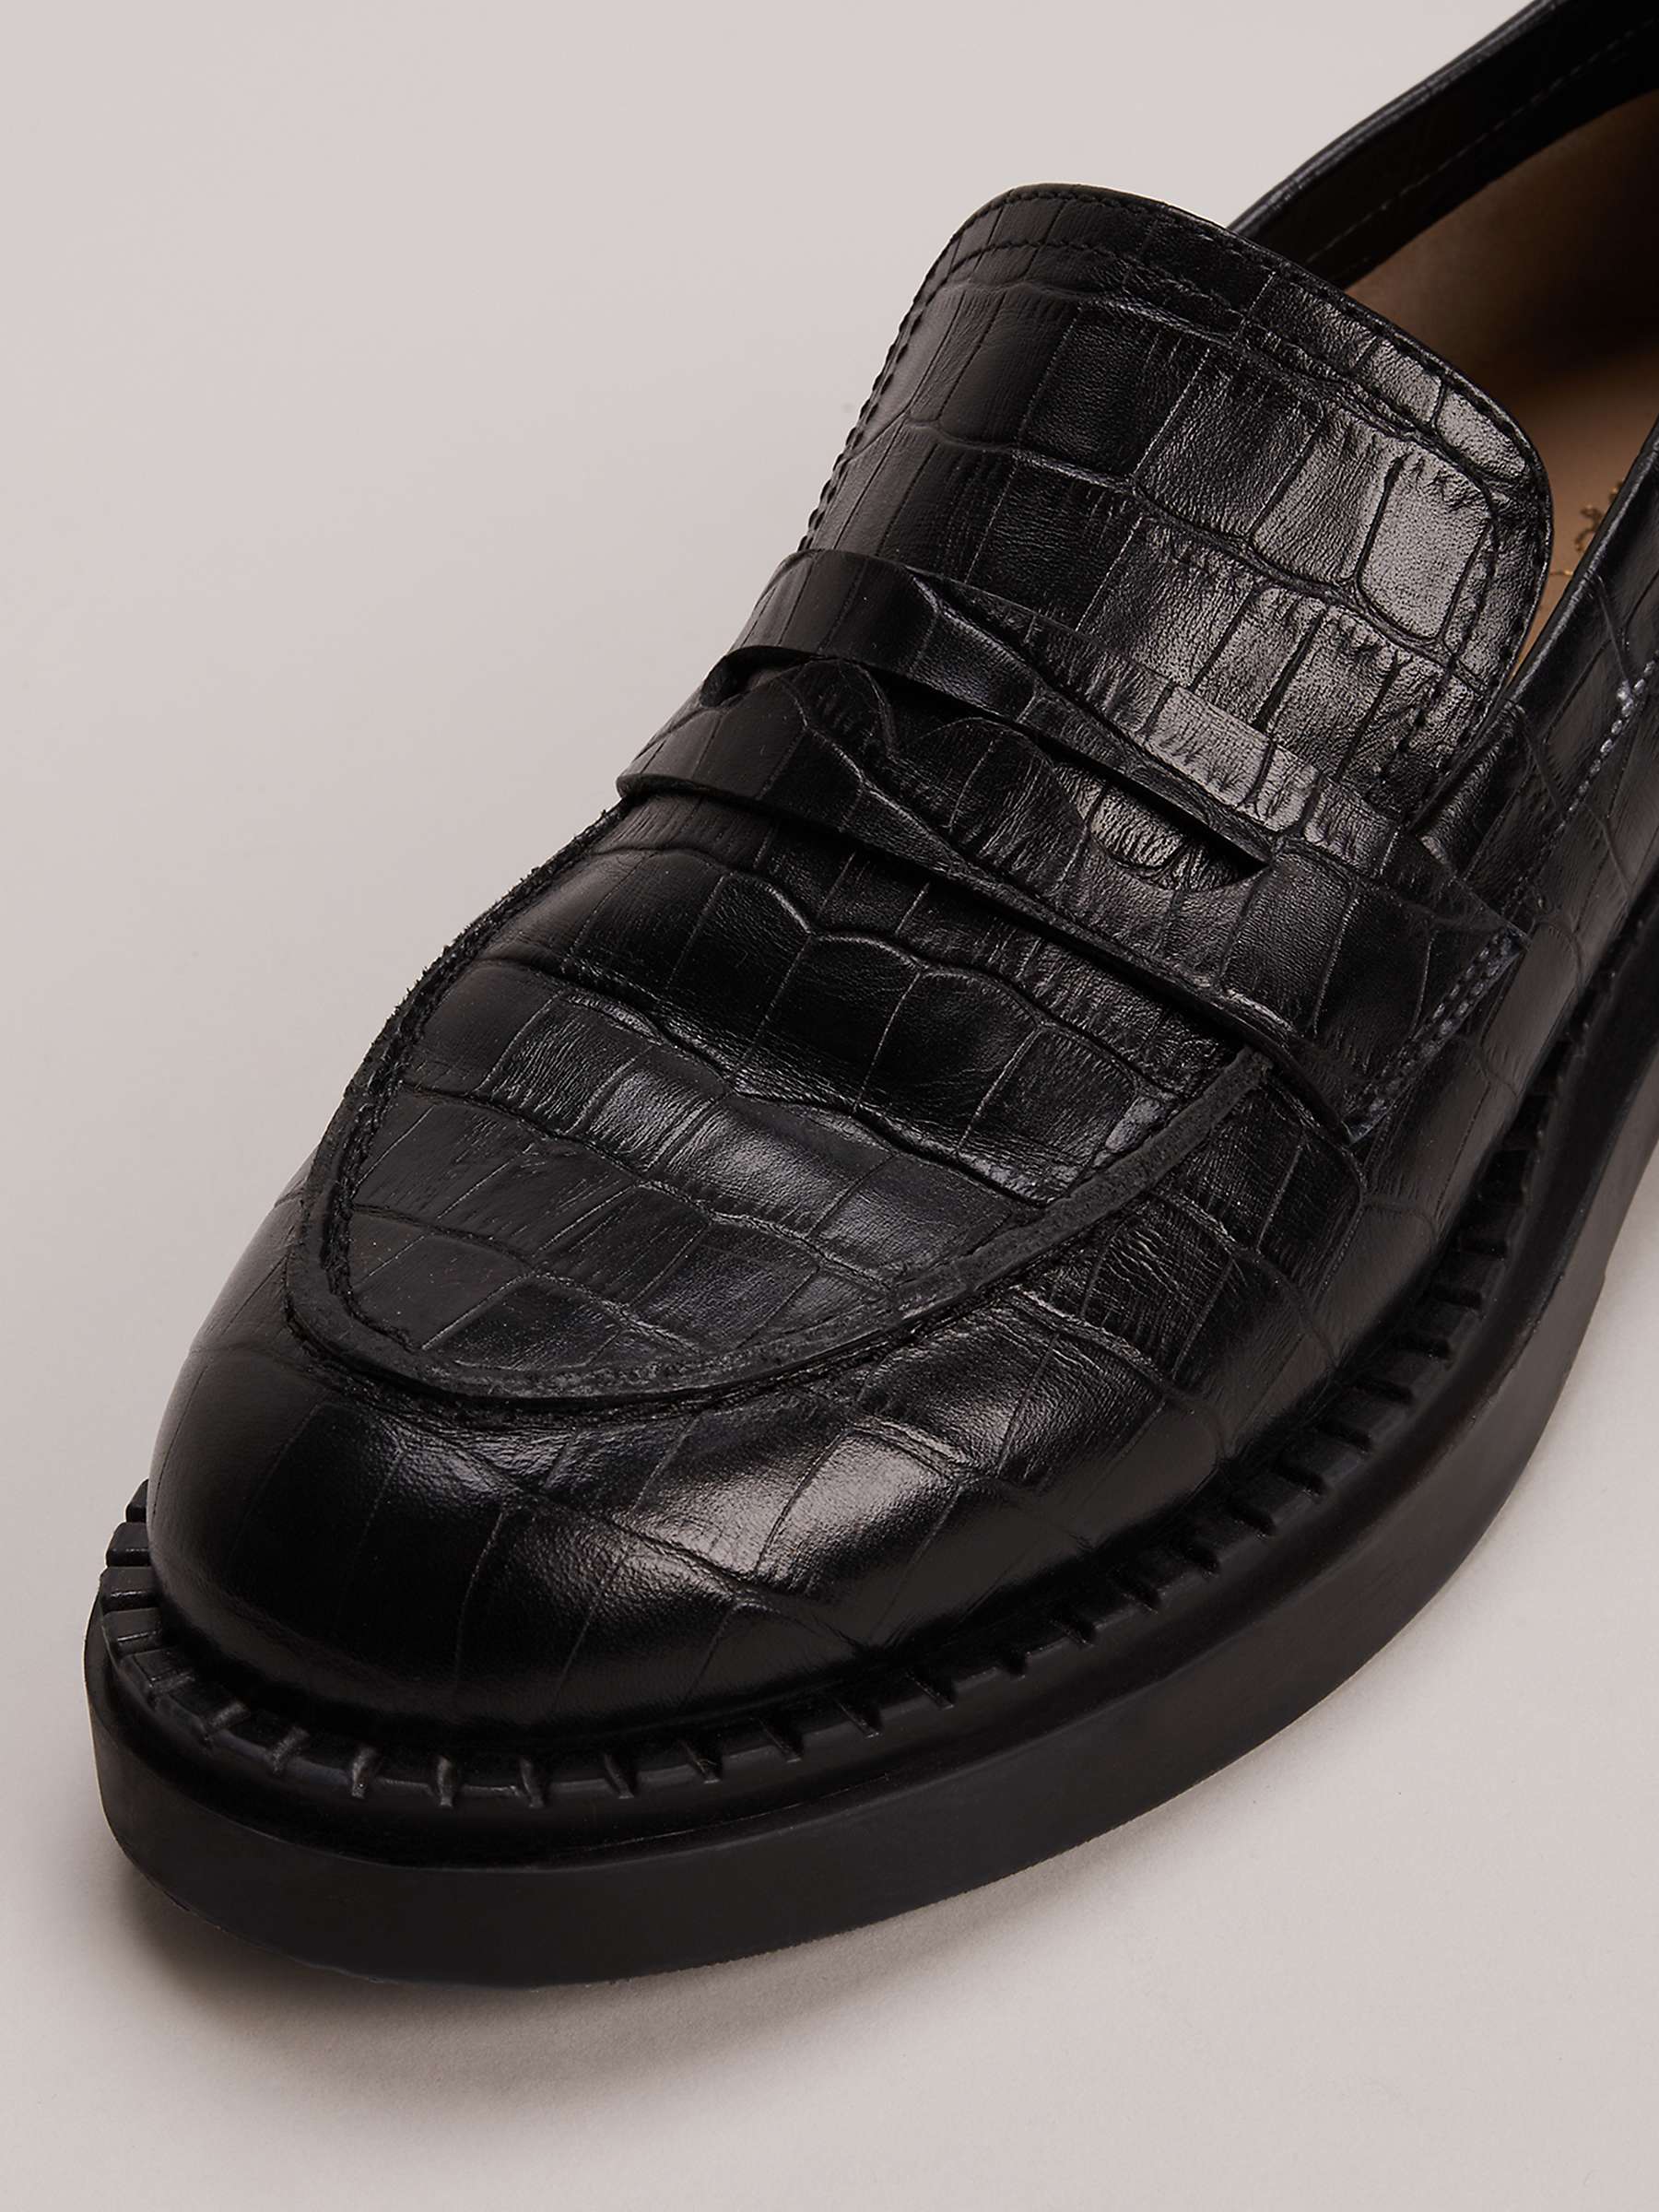 Buy Phase Eight Chunky Leather Loafers, Black Online at johnlewis.com